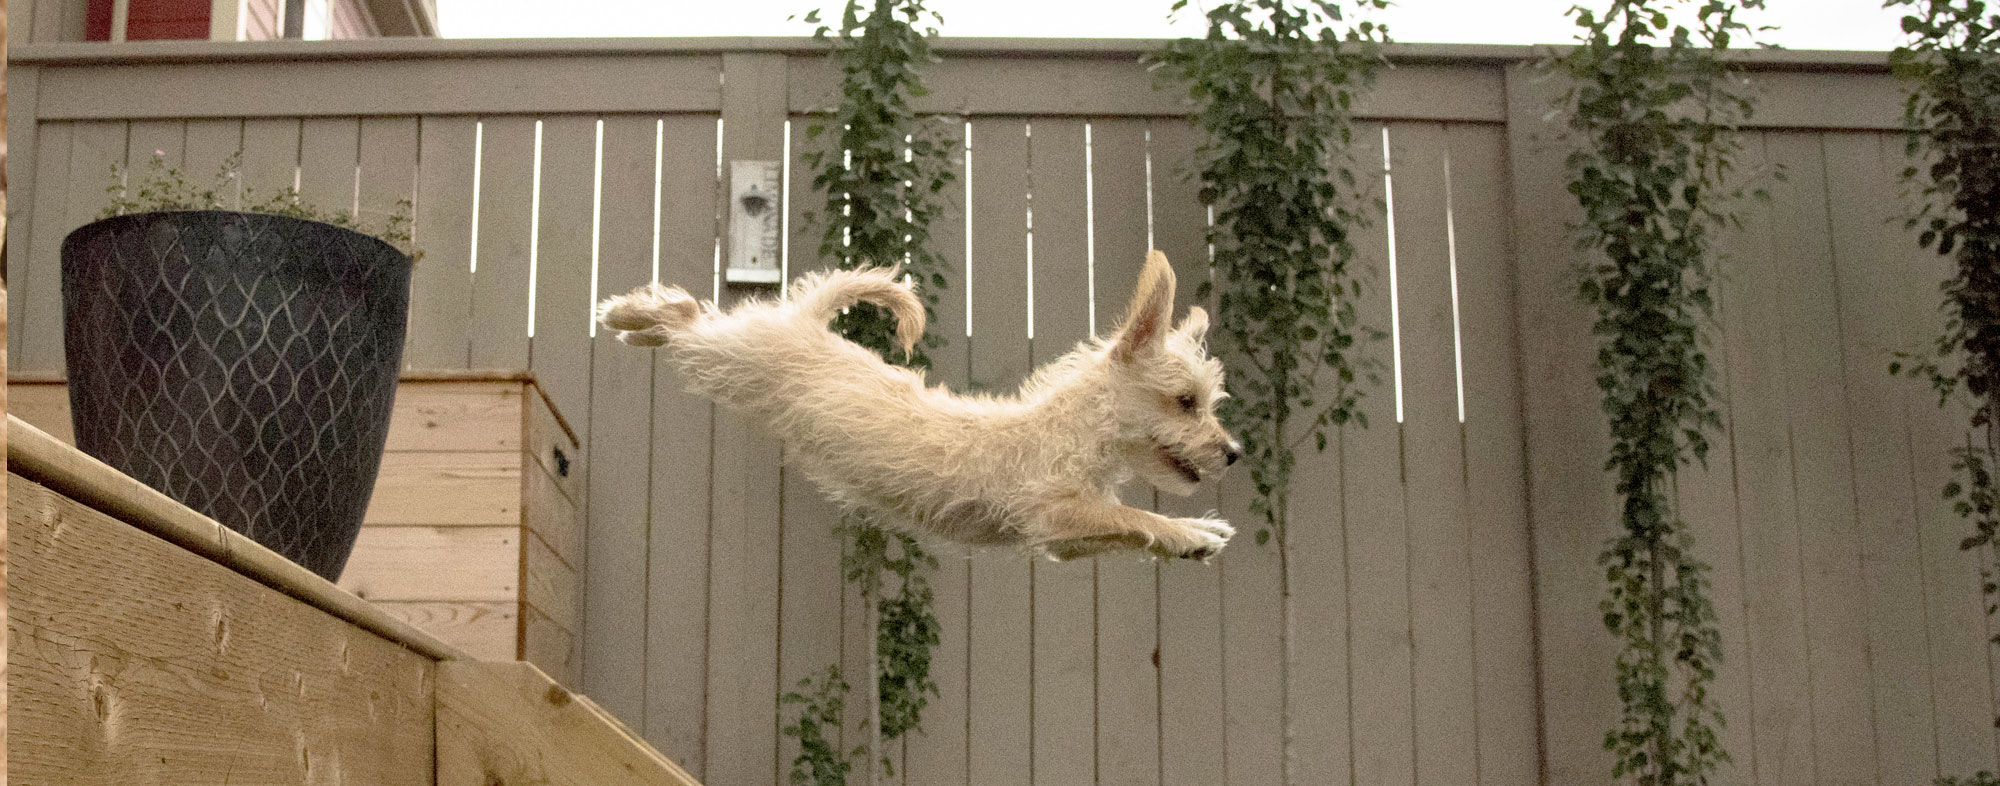 Small dog off-leash, sans collar, leaping through the air